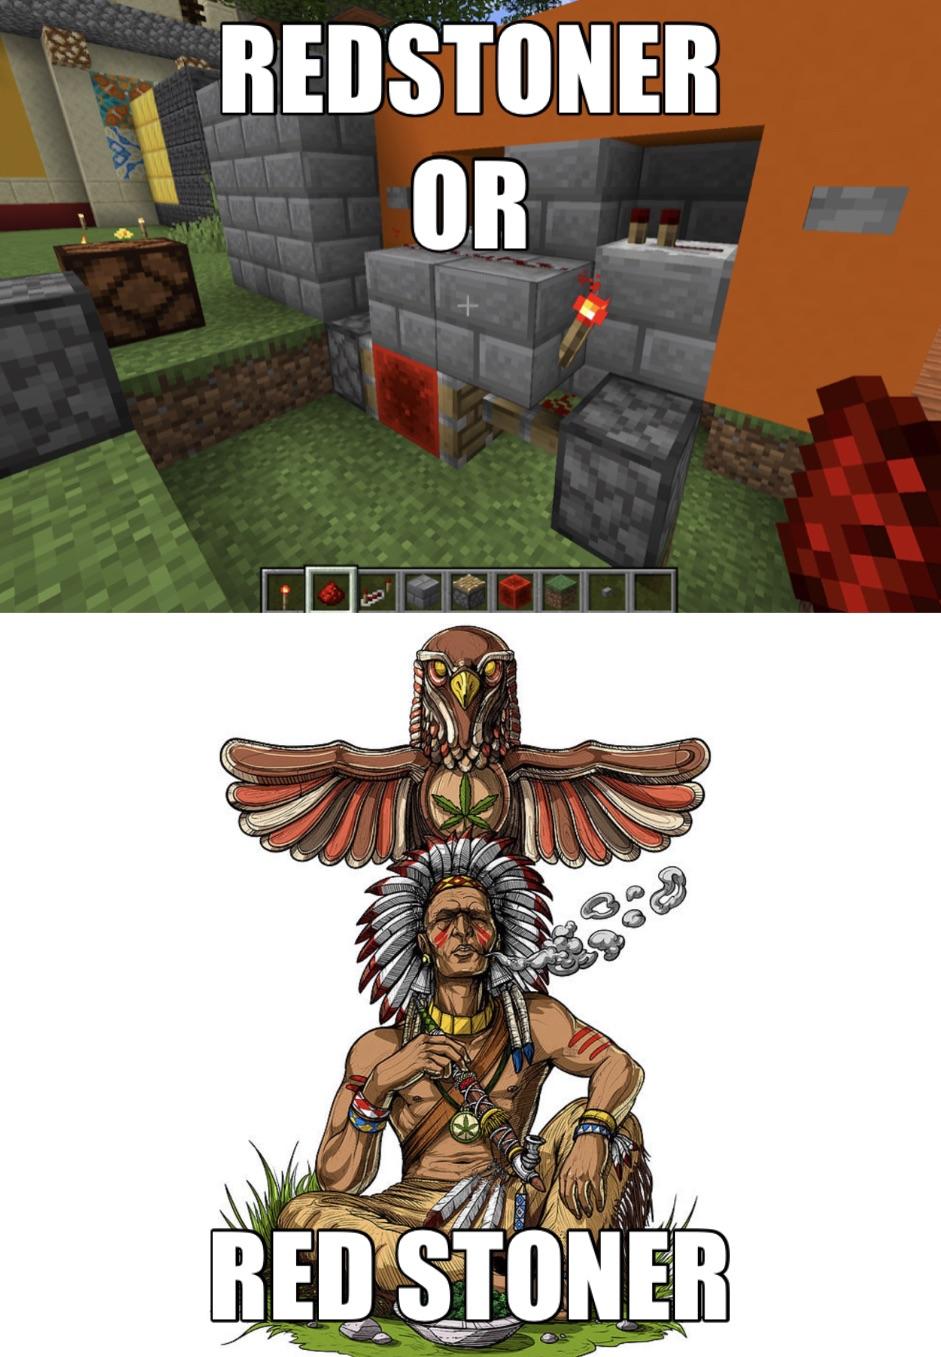 Minecraft Memes - "Crafting chaos"